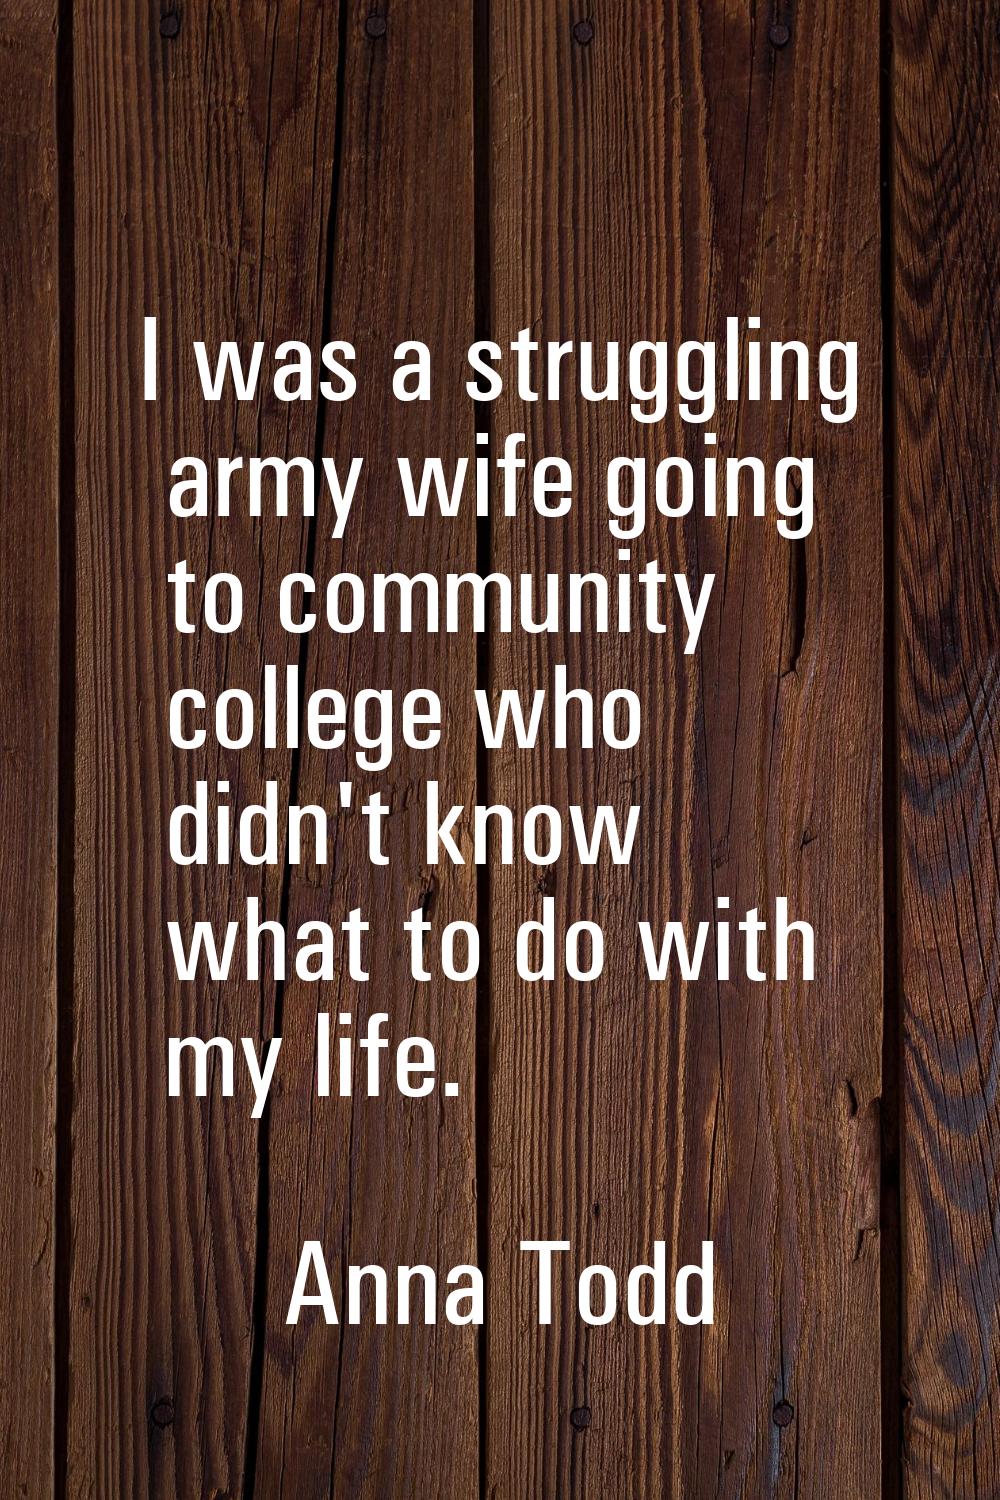 I was a struggling army wife going to community college who didn't know what to do with my life.